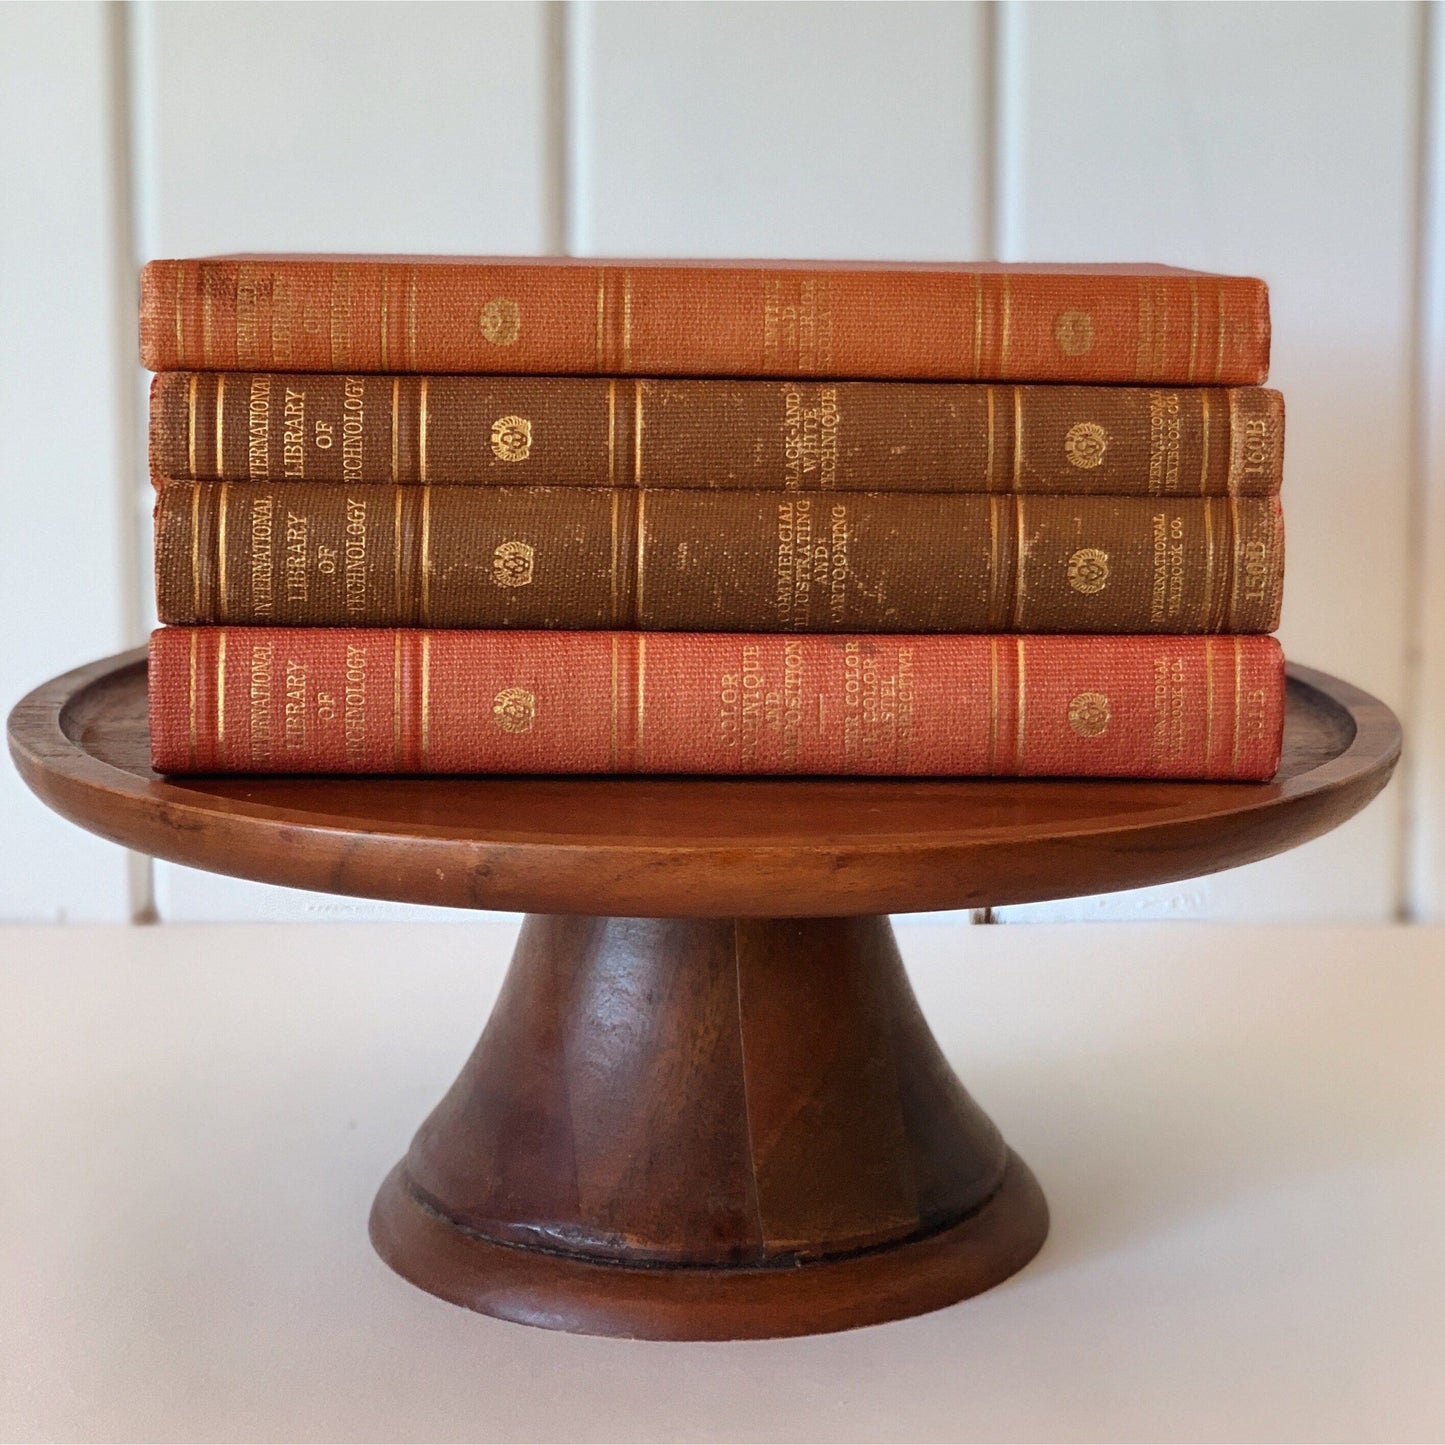 International Library of Technology Antique Red Book Set, Art Instruction Books